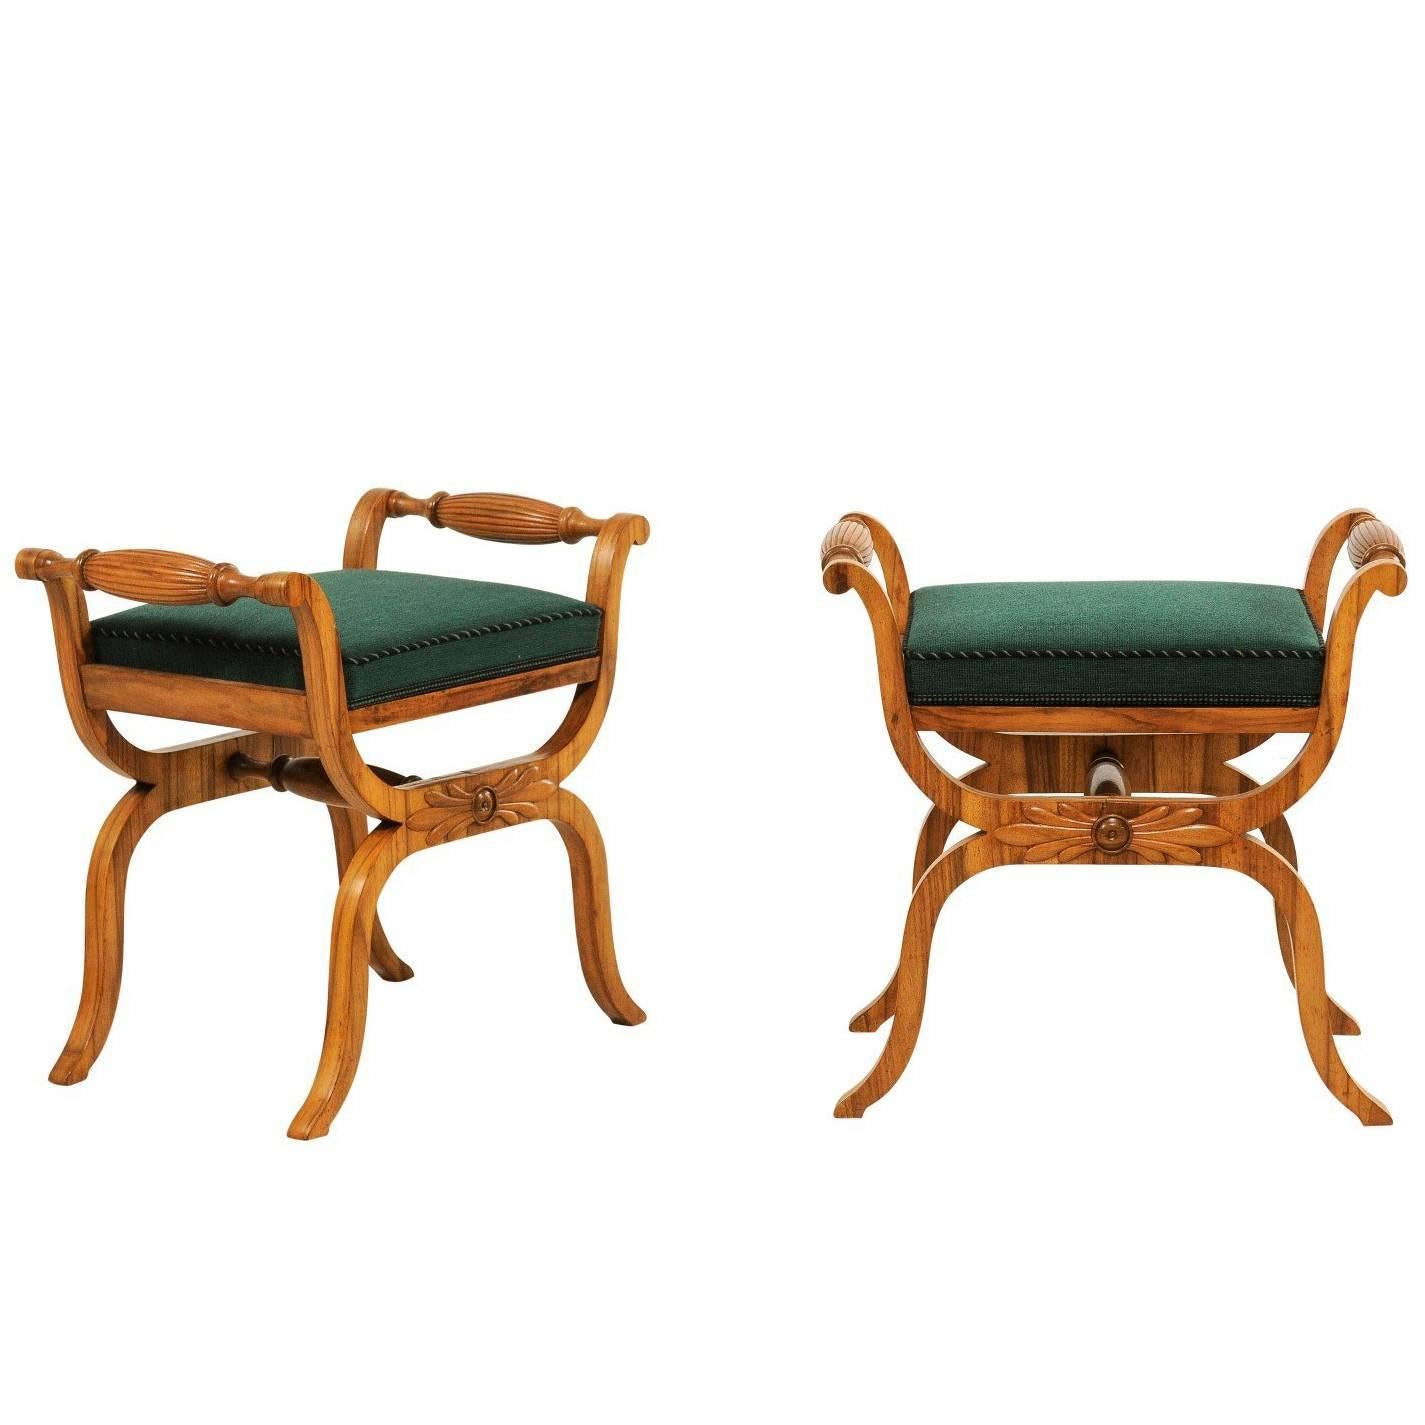 Pair of 1850s Austrian Biedermeier X-Form Stools with Green Upholstered Seats